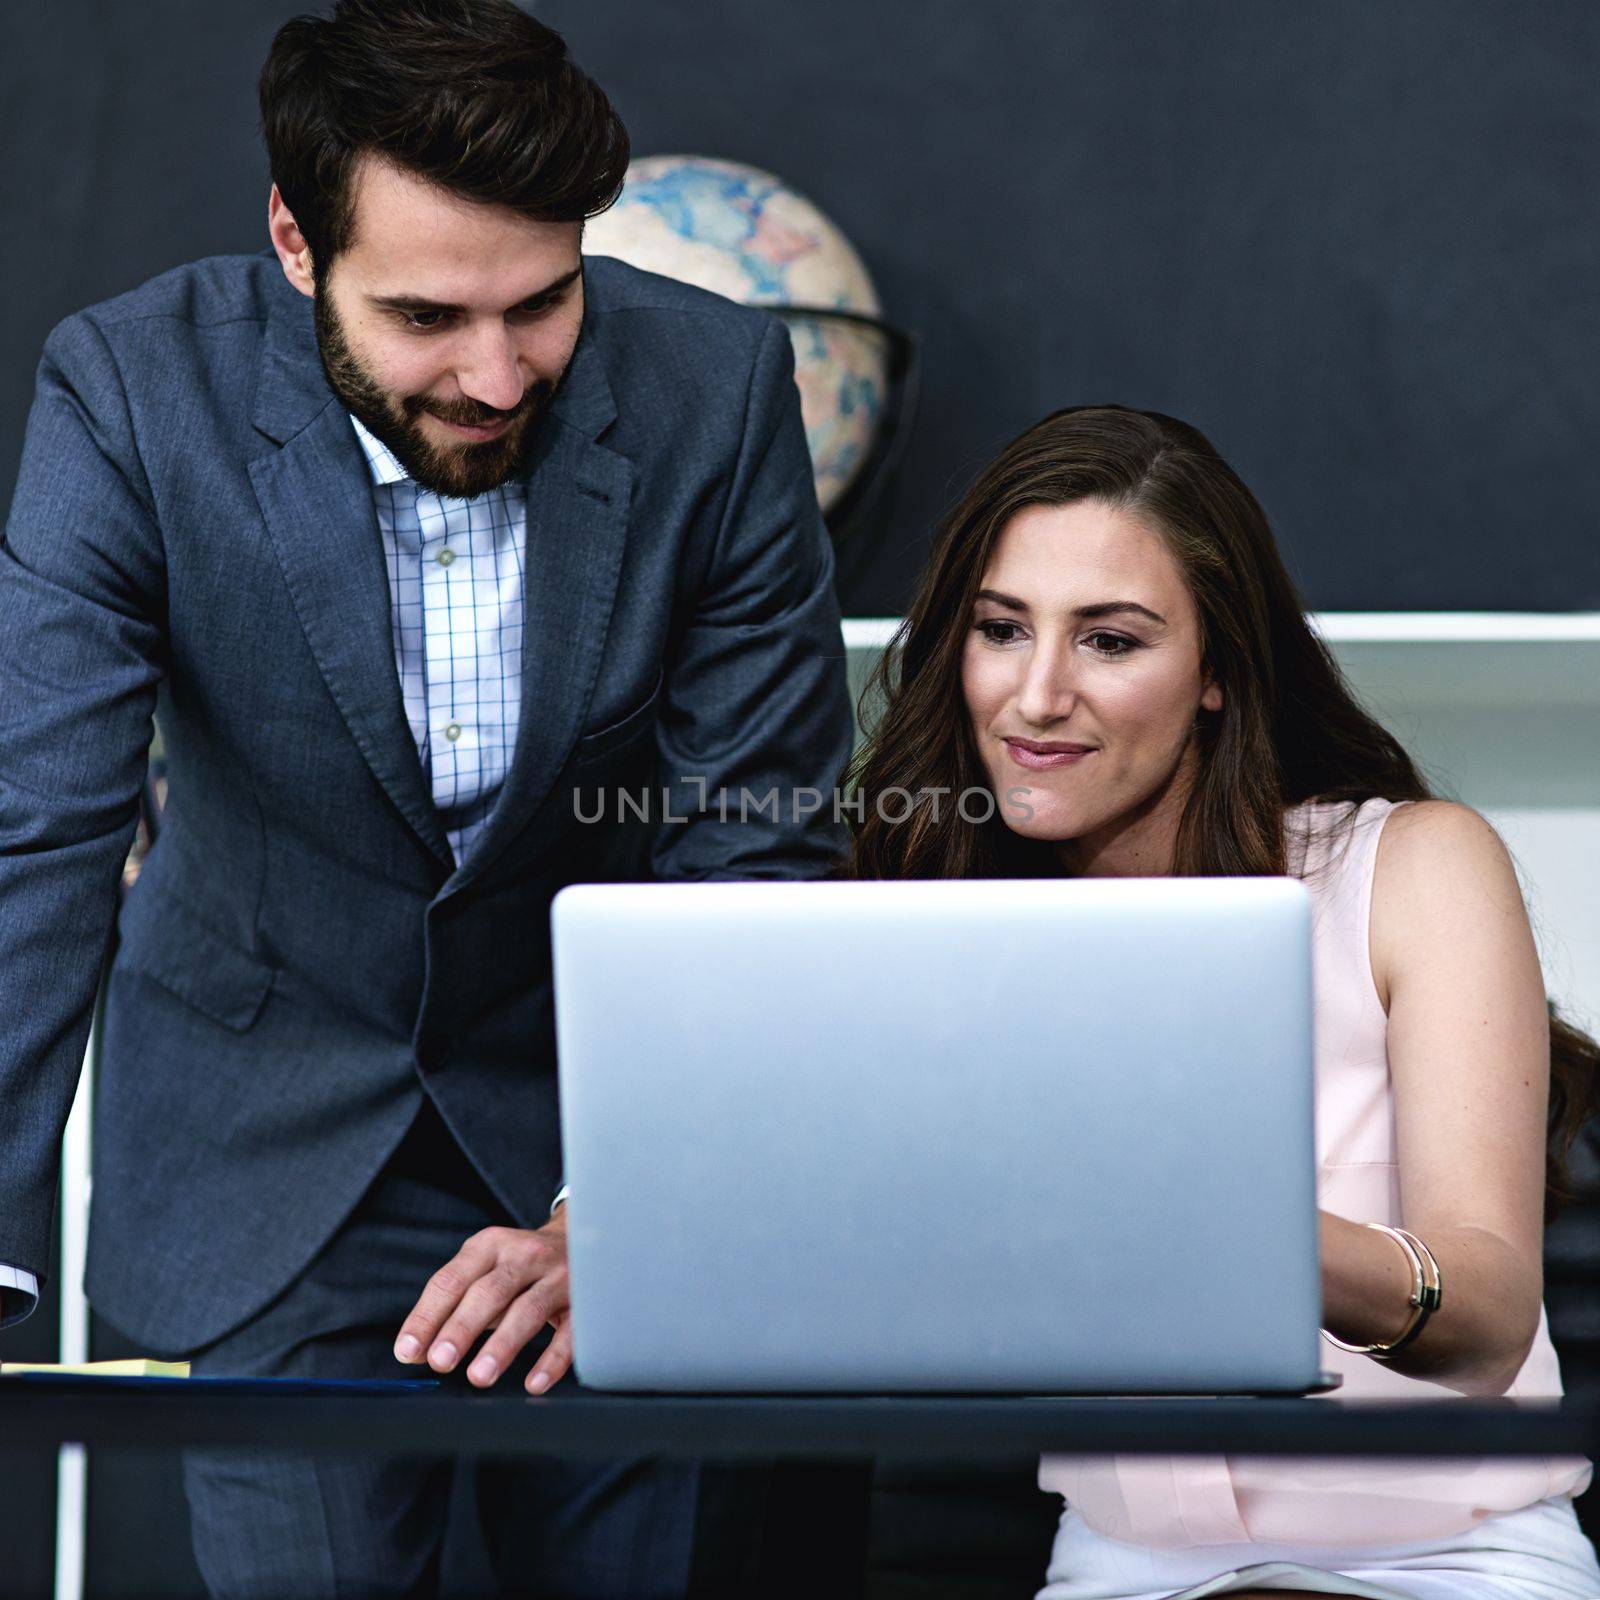 Working their magic together. businesspeople working together on a laptop in a modern office